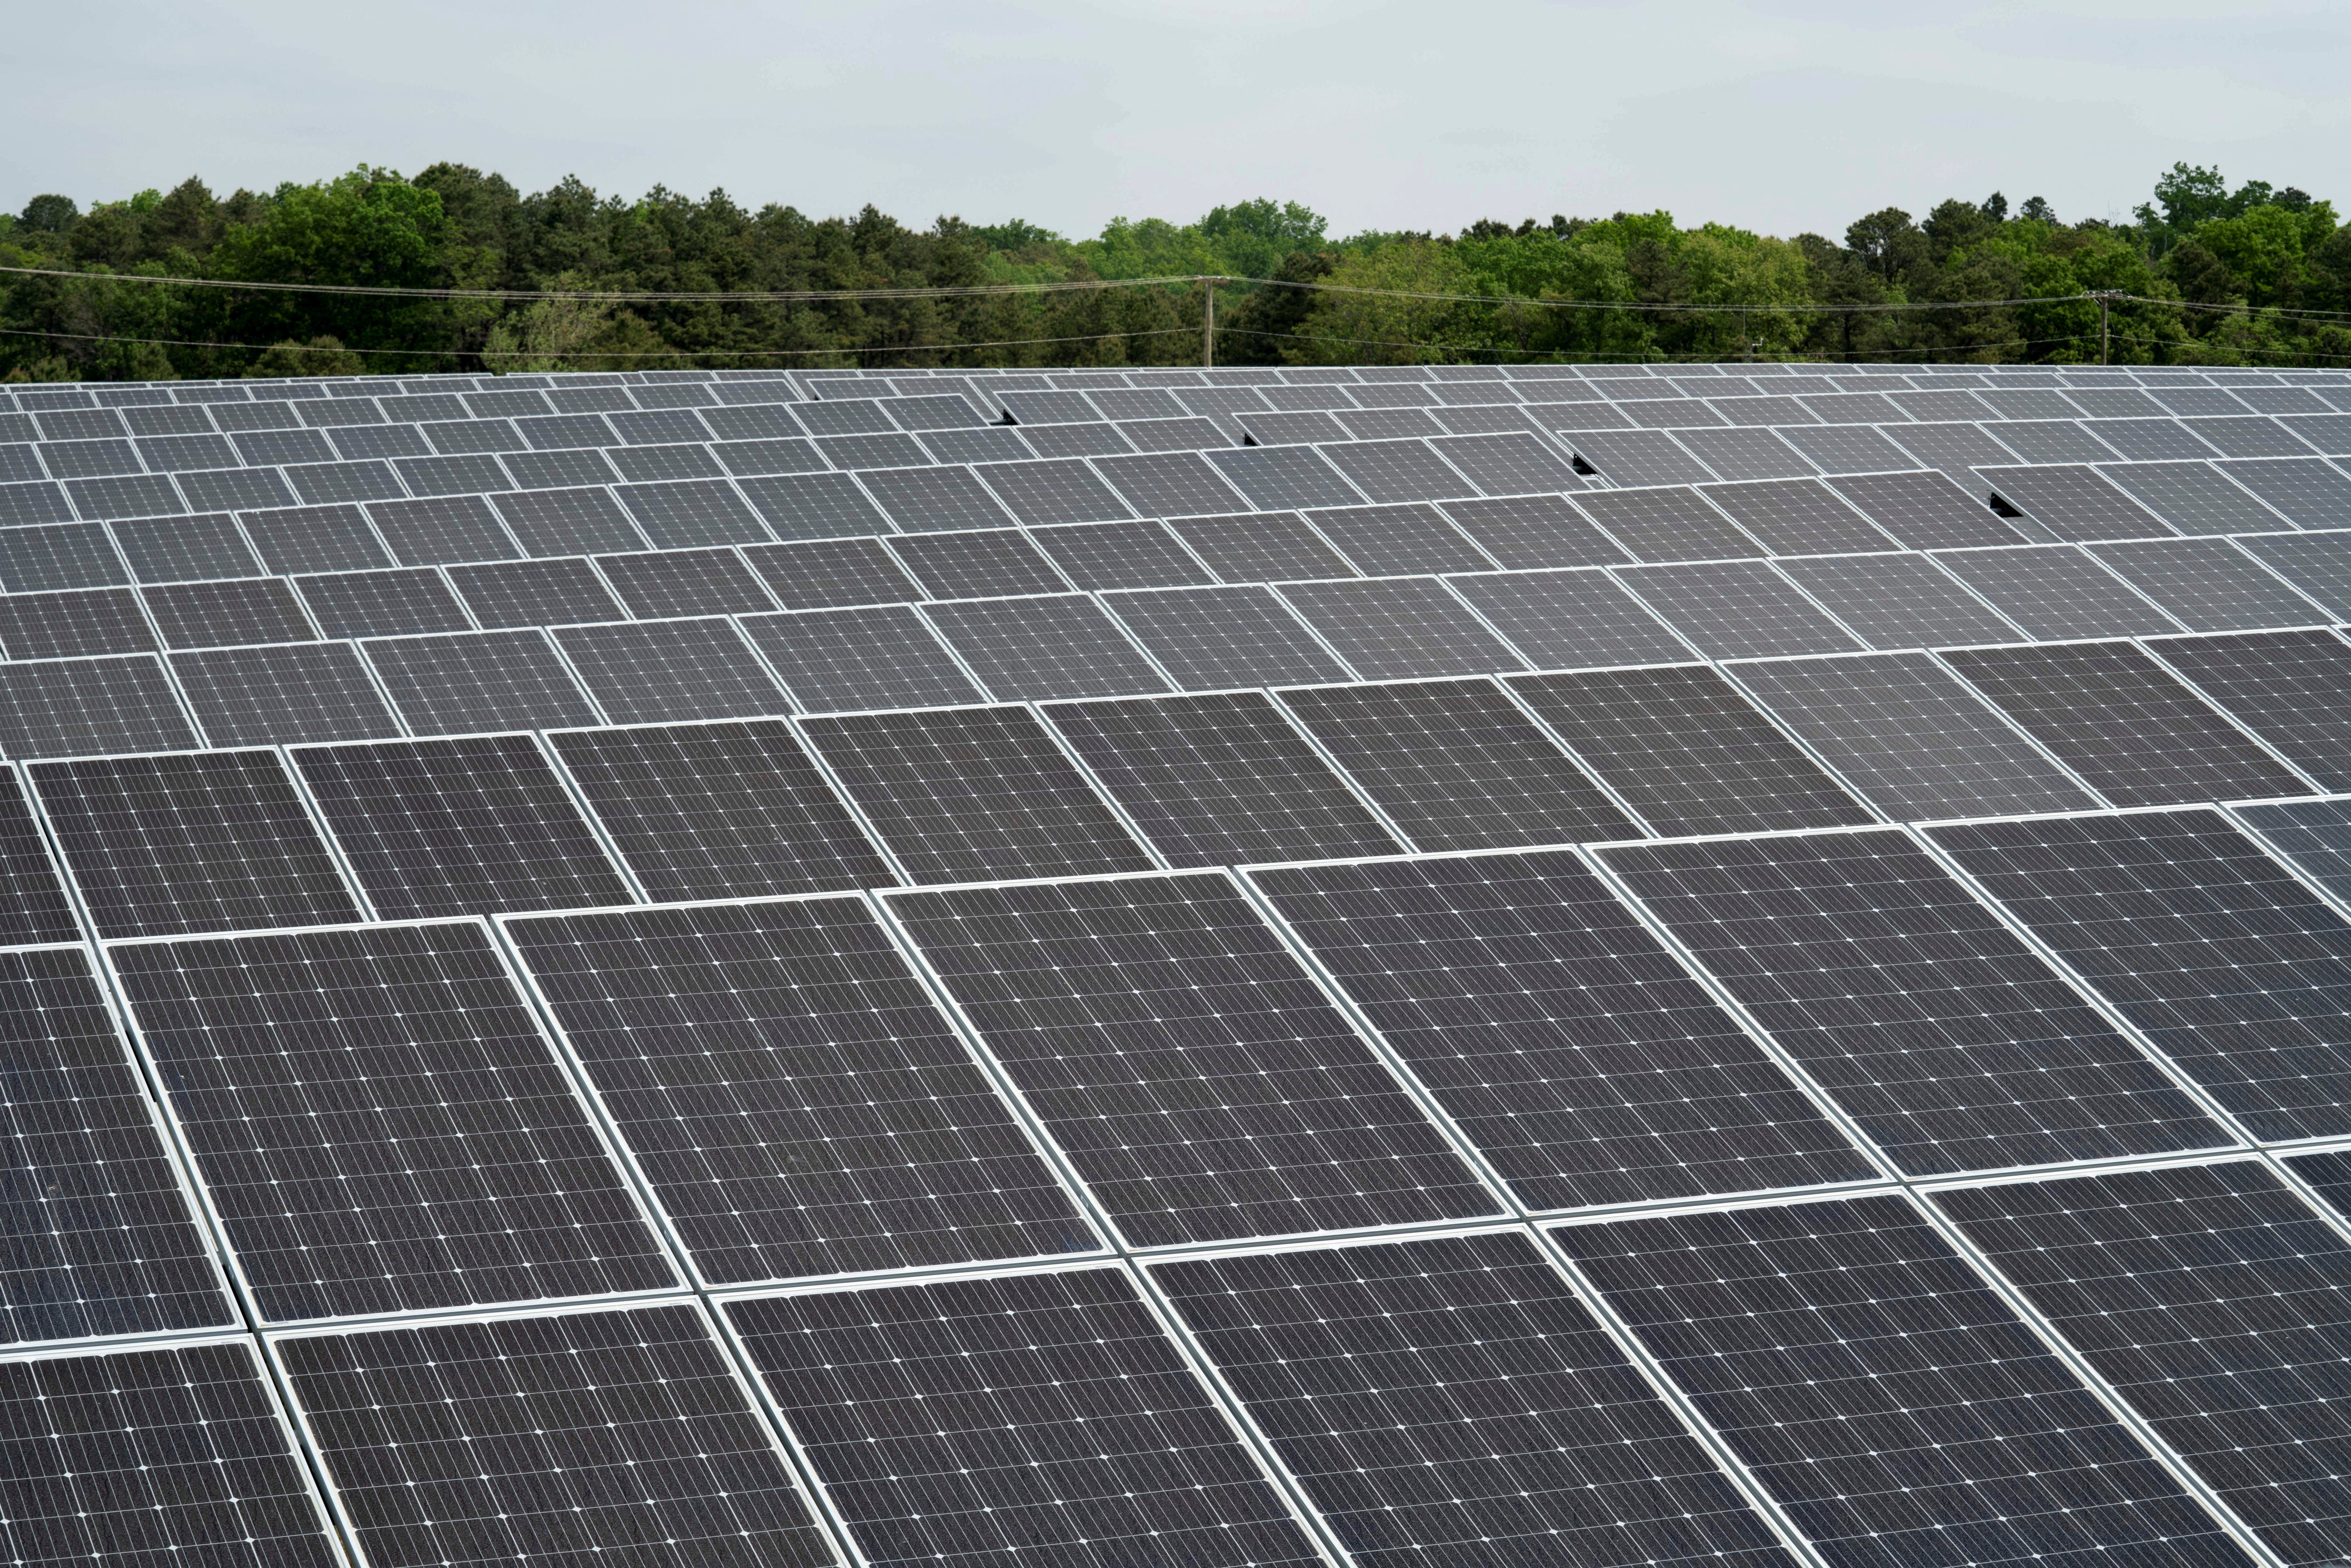 Solar developers look to post-industrial sites for industry's dramatic growth